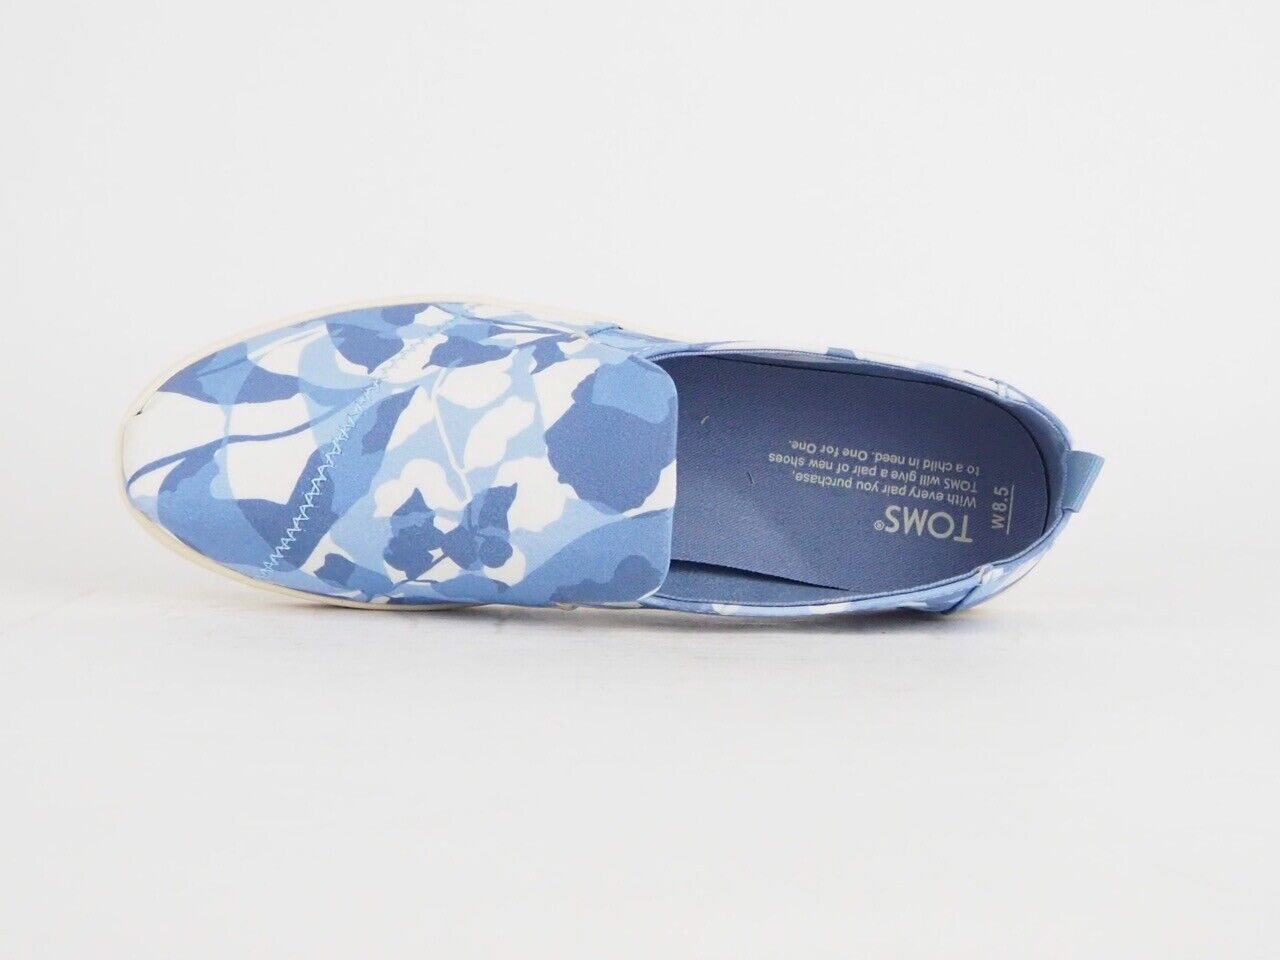 Womens Toms Deconstructed Alpargata Blue Leaf Flats Slip On Trainers Uk 6.5 - London Top Style